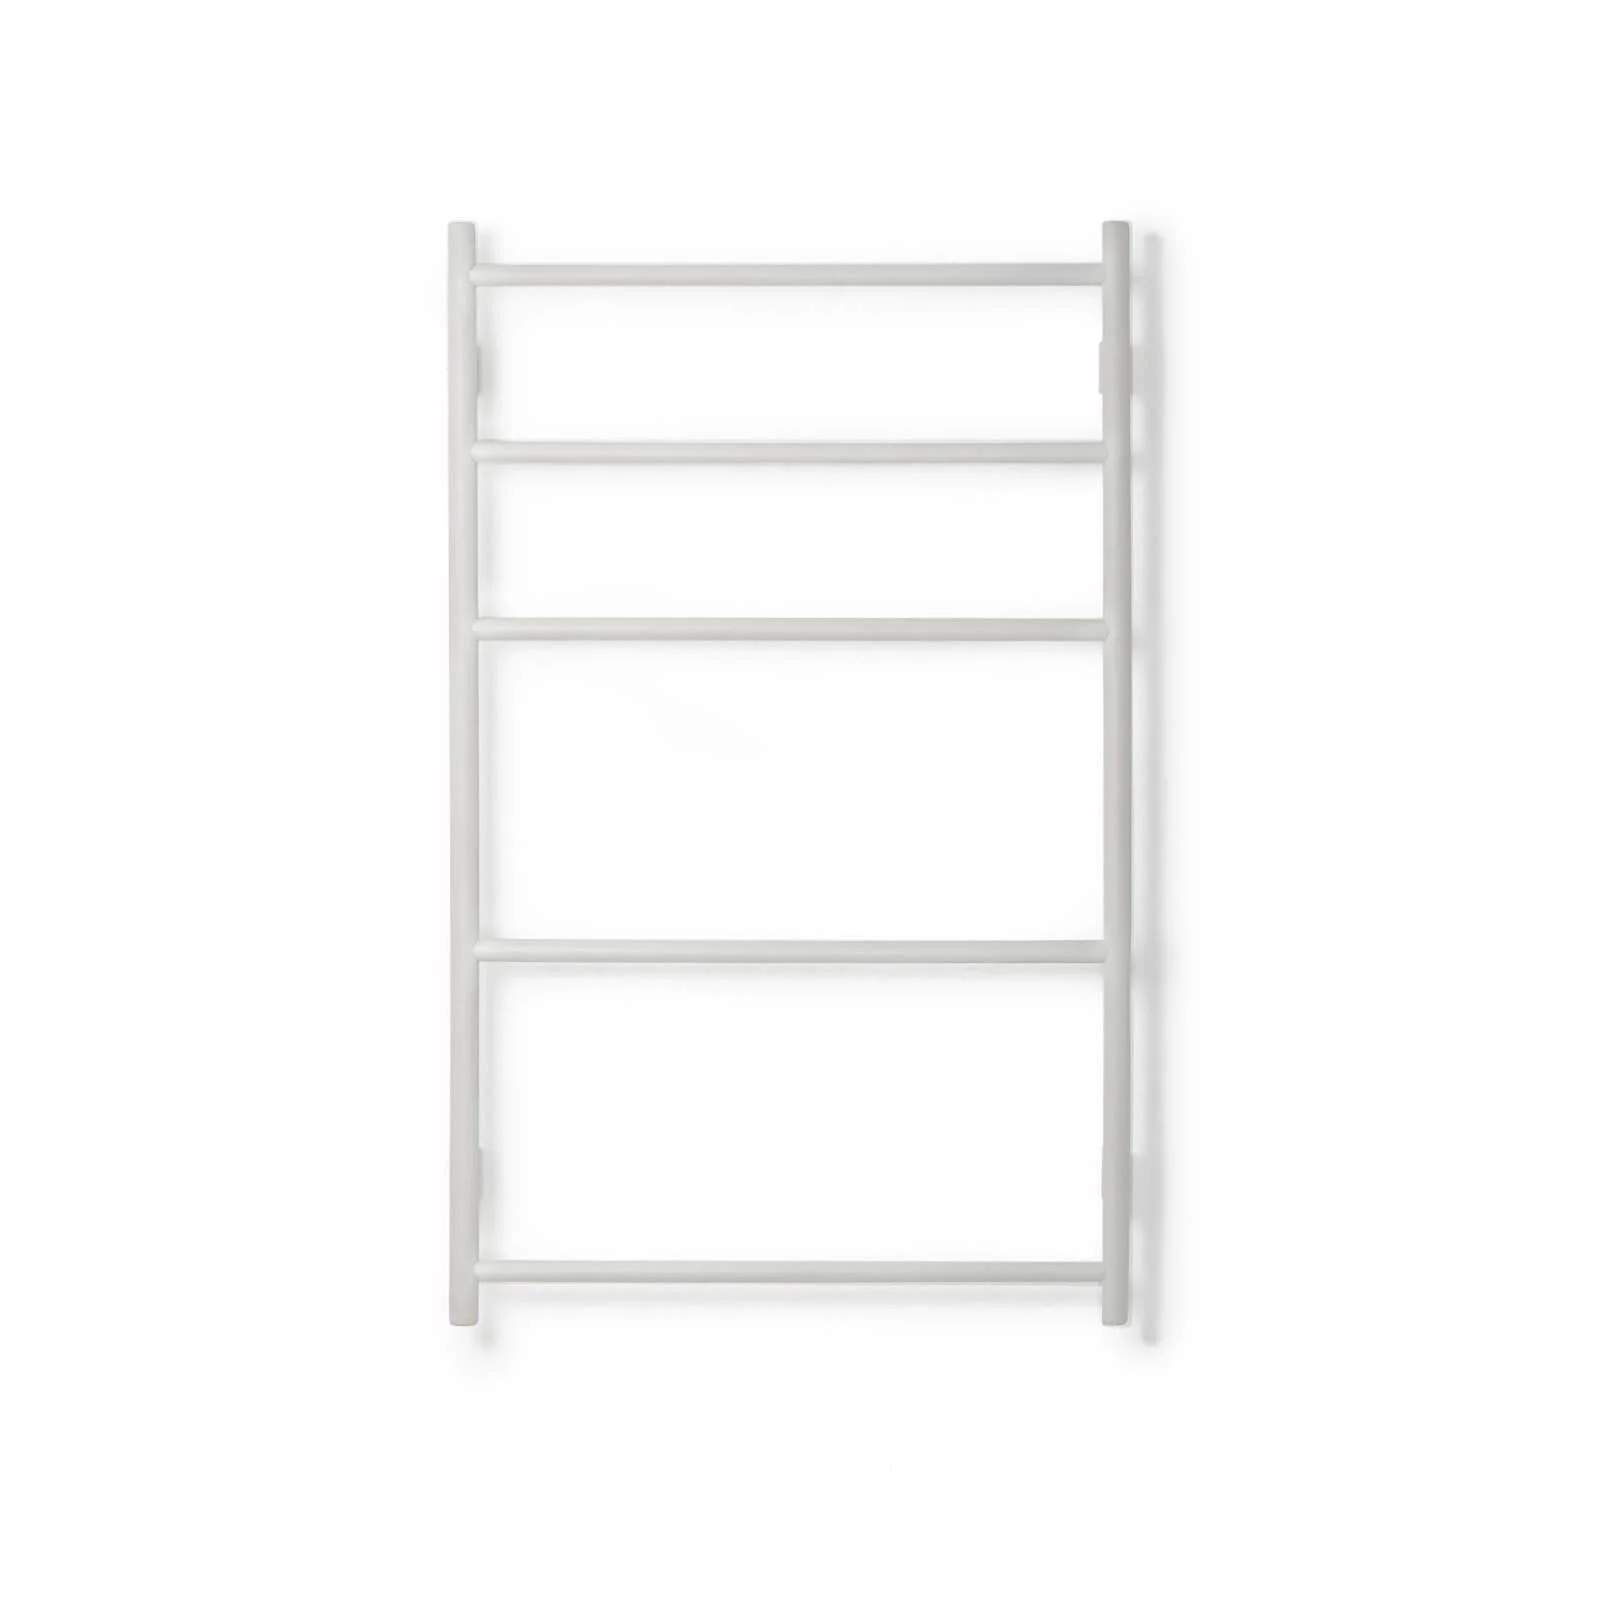 Wireworks Oyster White Towel Rail Wall Bar Image 1